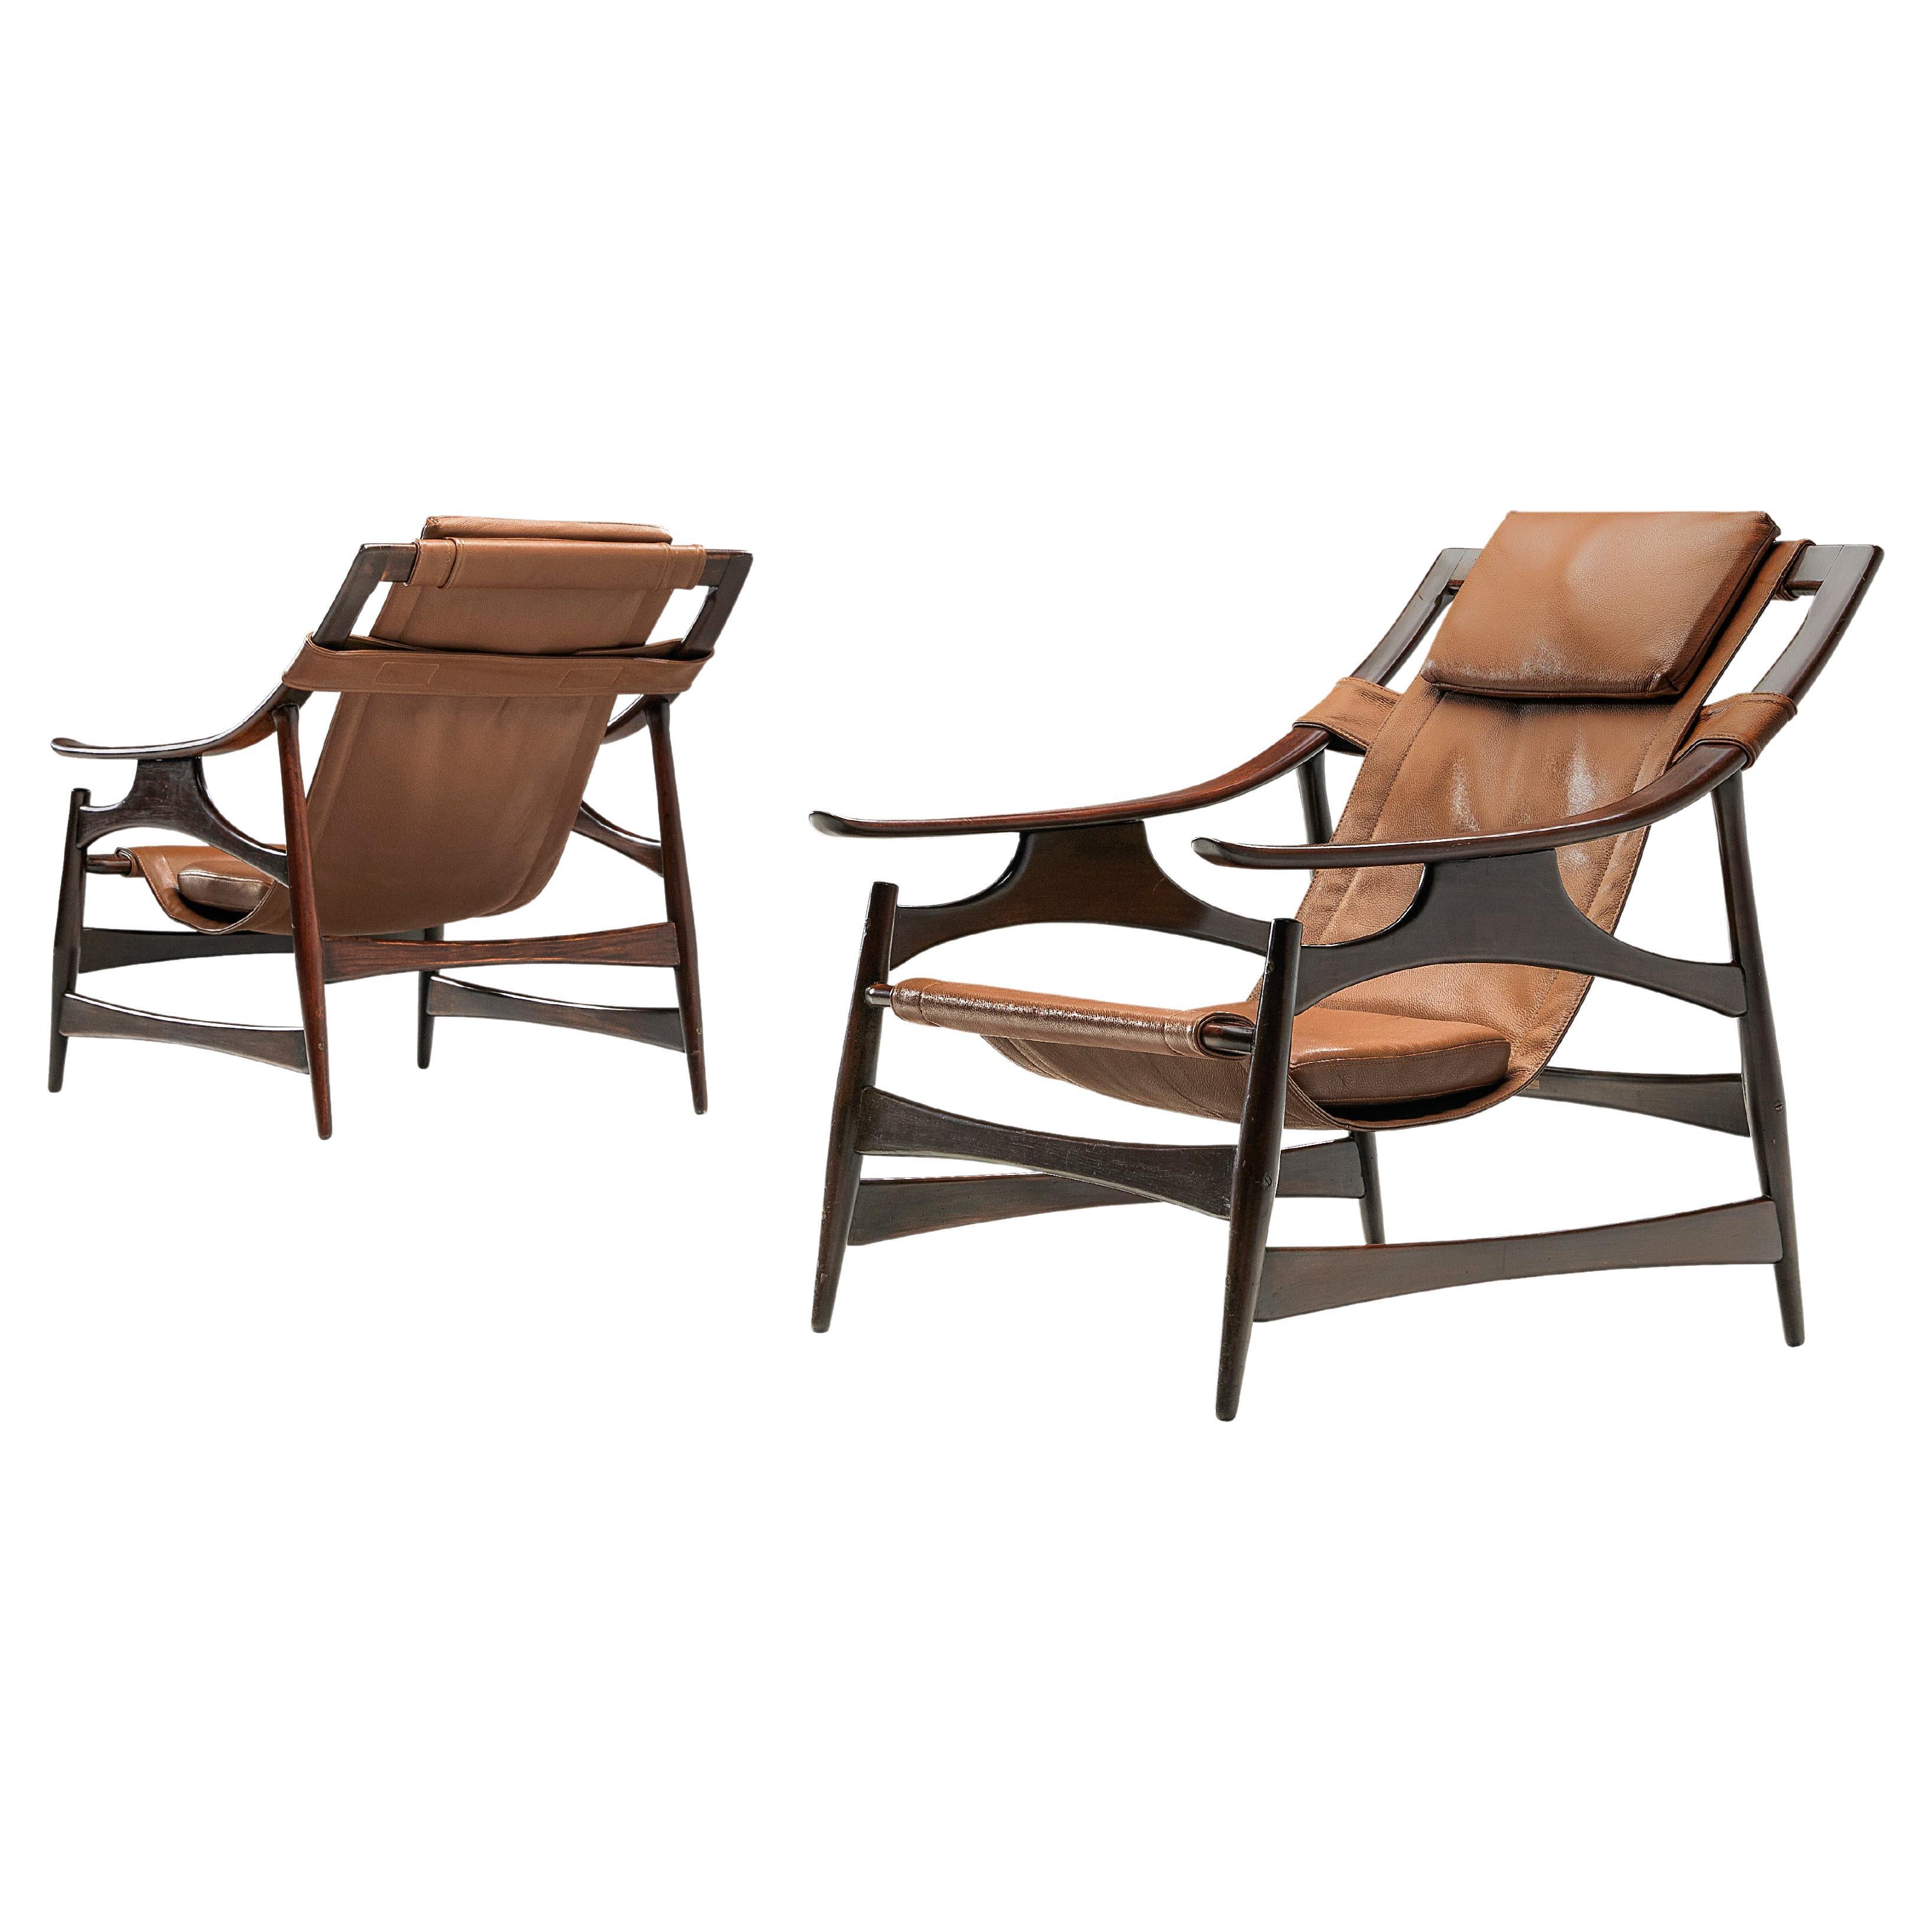 Pair of Liceu De Artes Sao Paulo Lounge Chairs in Walnut and Leather